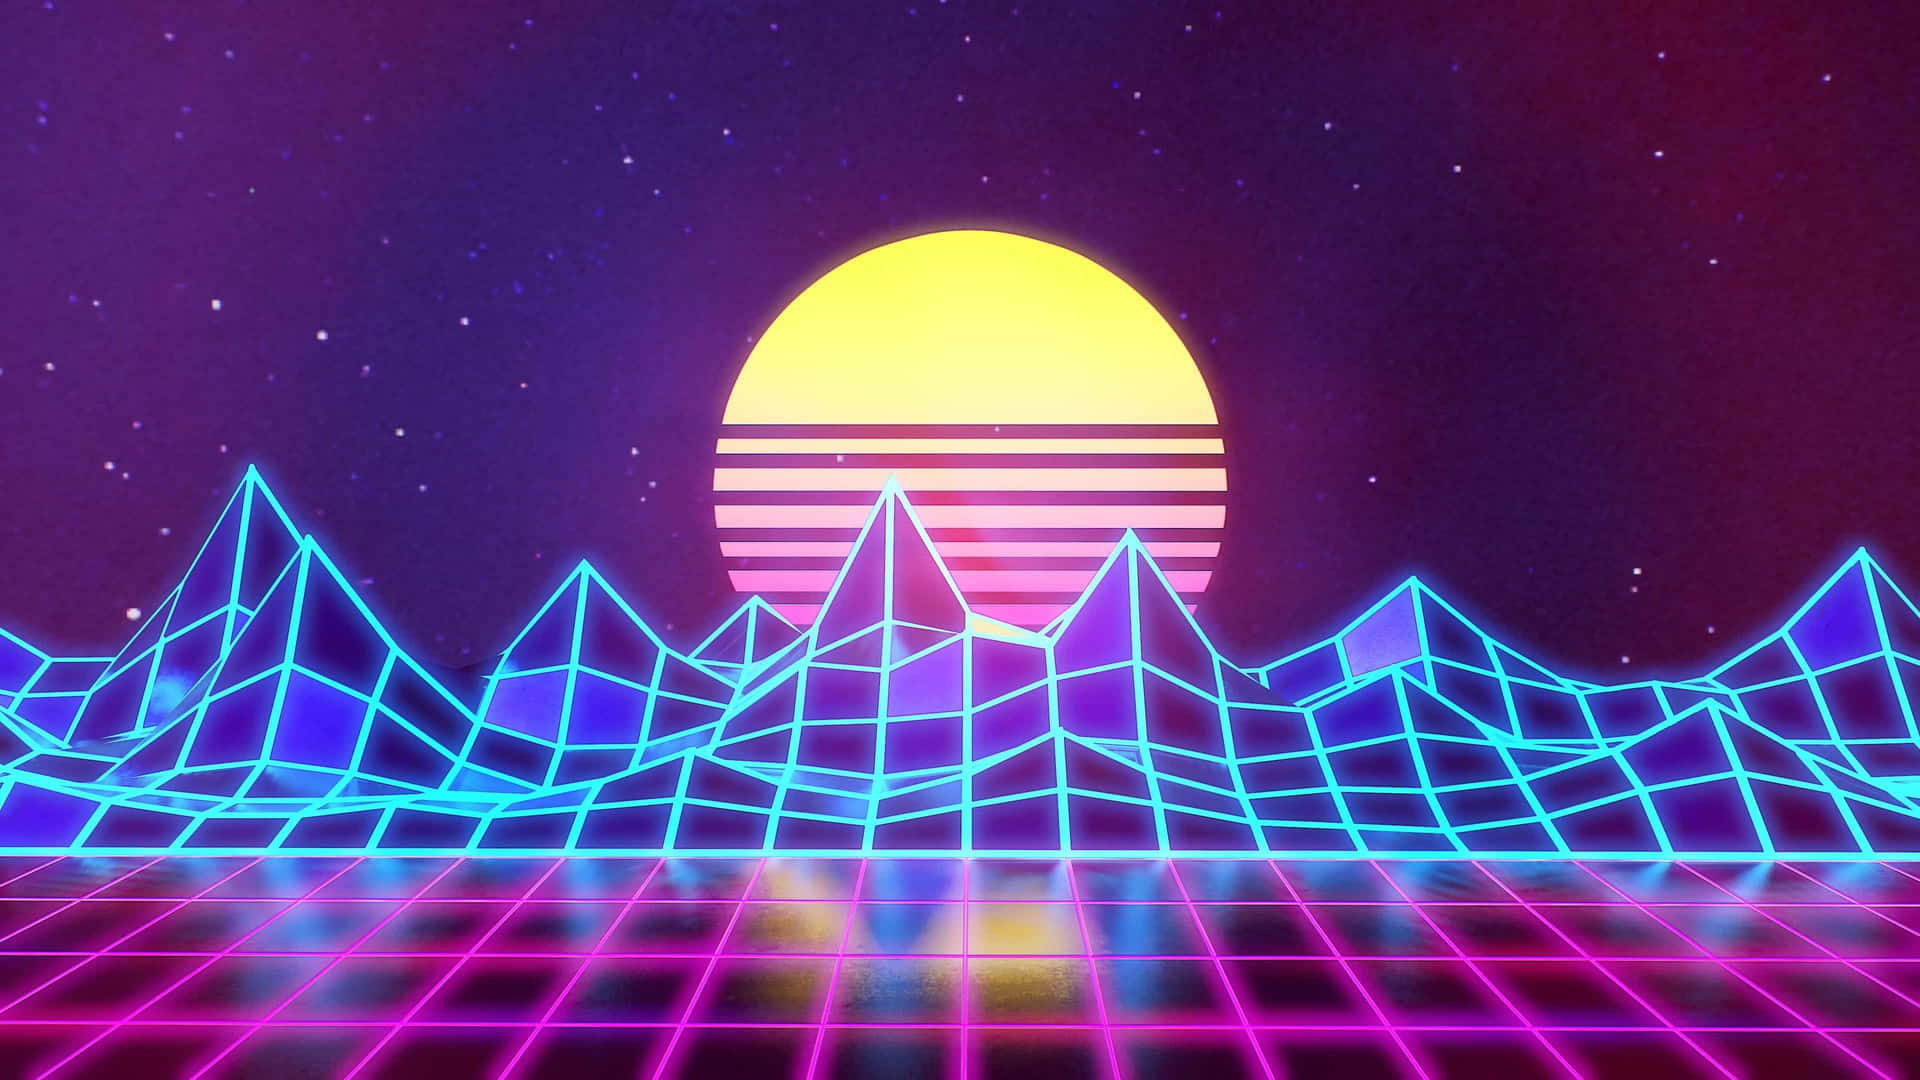 Explore the web with the Vaporwave Tablet. Wallpaper